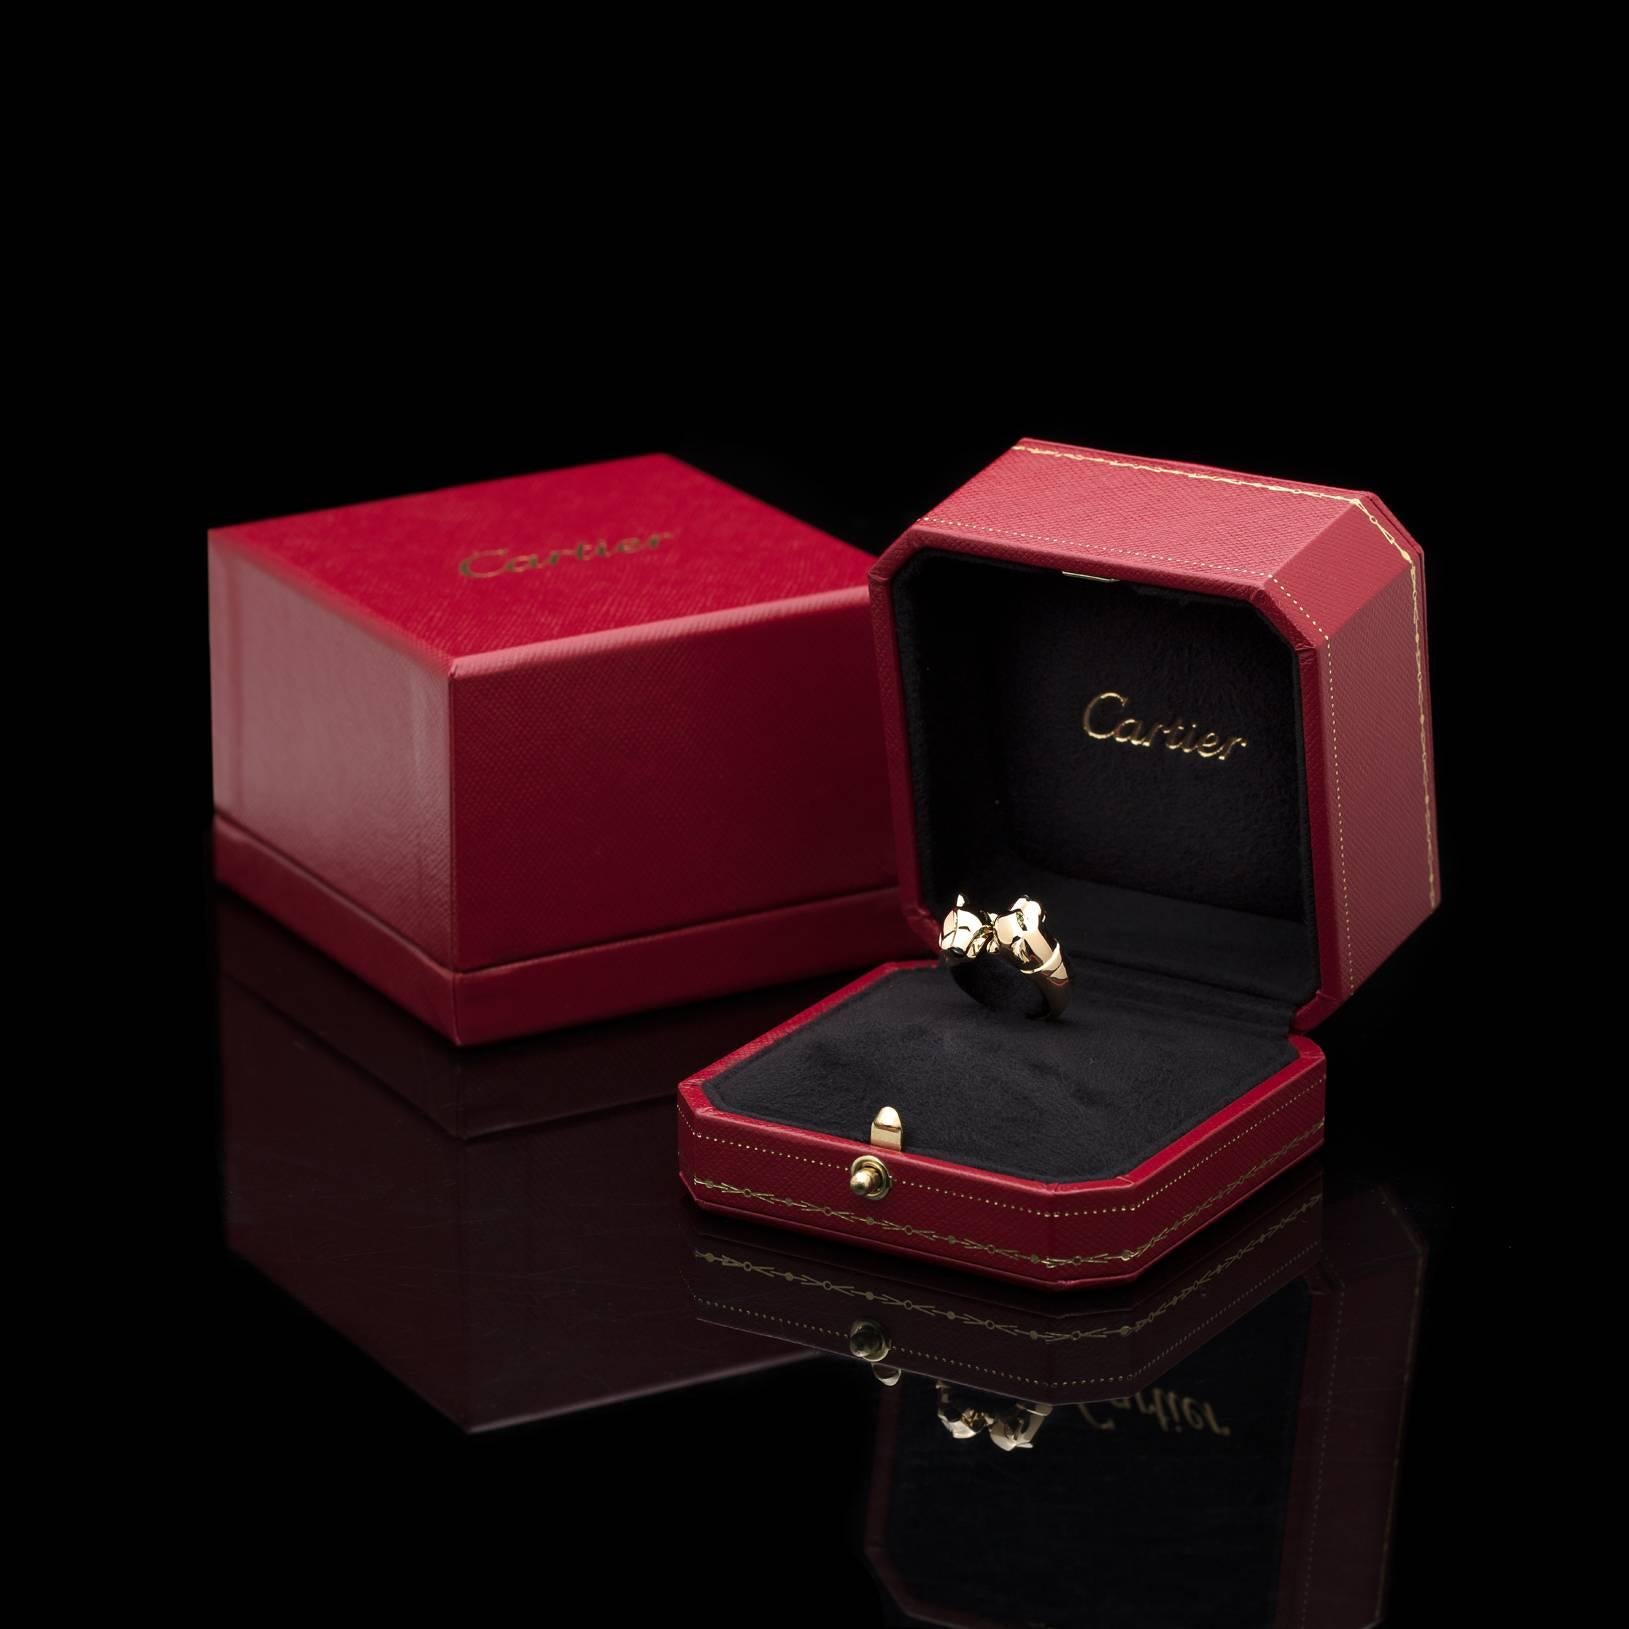 The must-have contemporary styling of a classic Cartier design, originally introduced in 1914. The 18k gold ring features facing panthers, tsavorite garnet eyes and onyx noses. The ring weighs 11.6 grams and is a size 5. With French marks and a